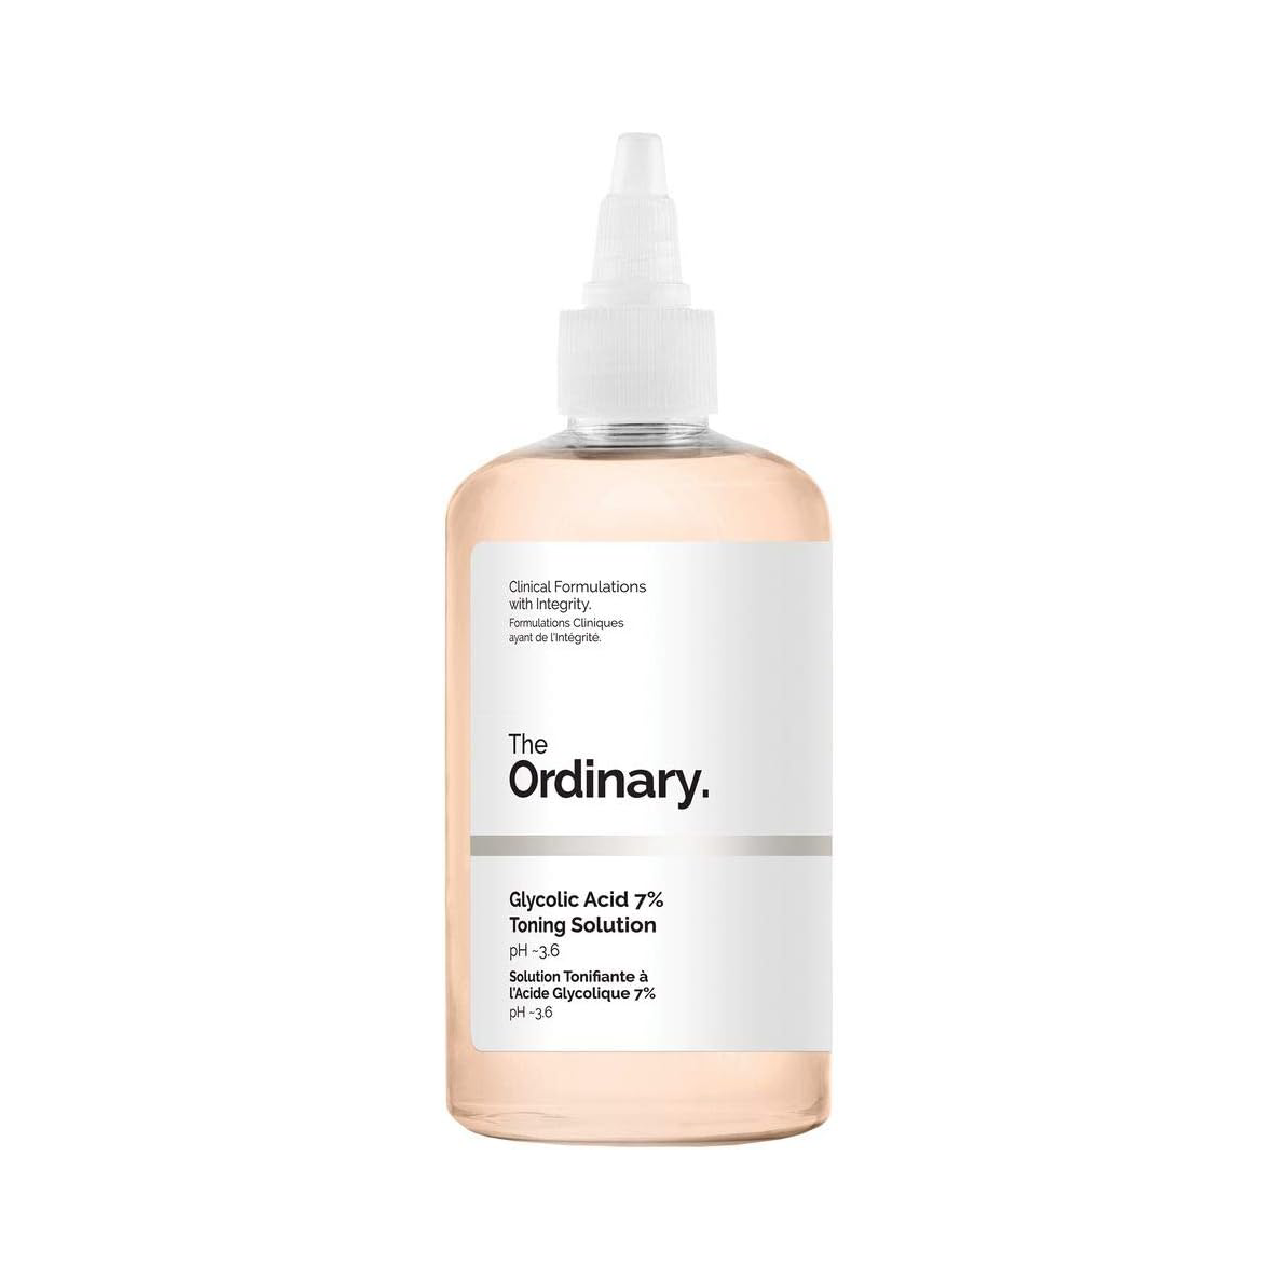 Bottle of The Ordinary Glycolic Acid 7% Toning Solution on a white background